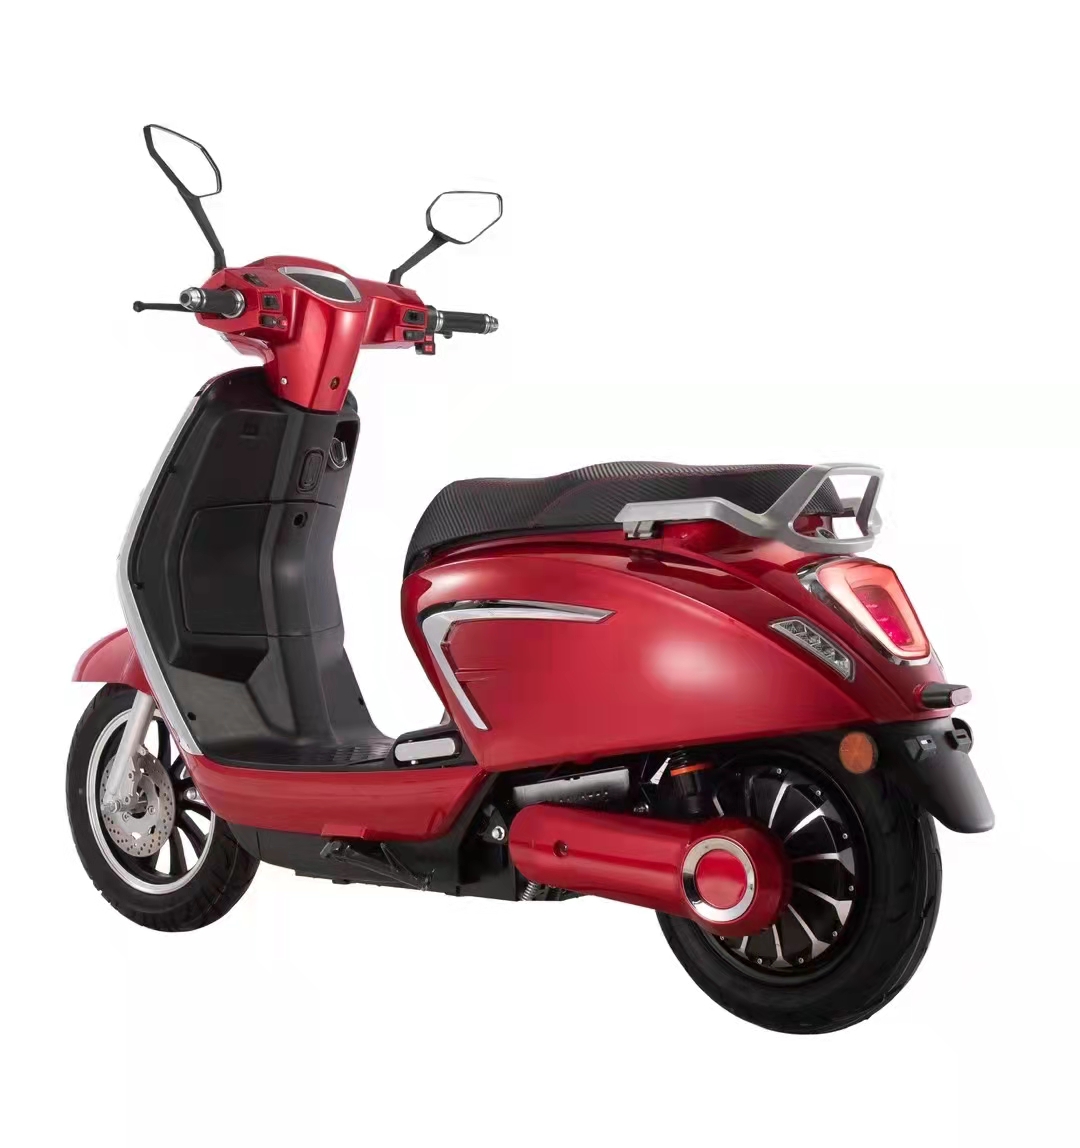 Kingche VSP Electric Scooter